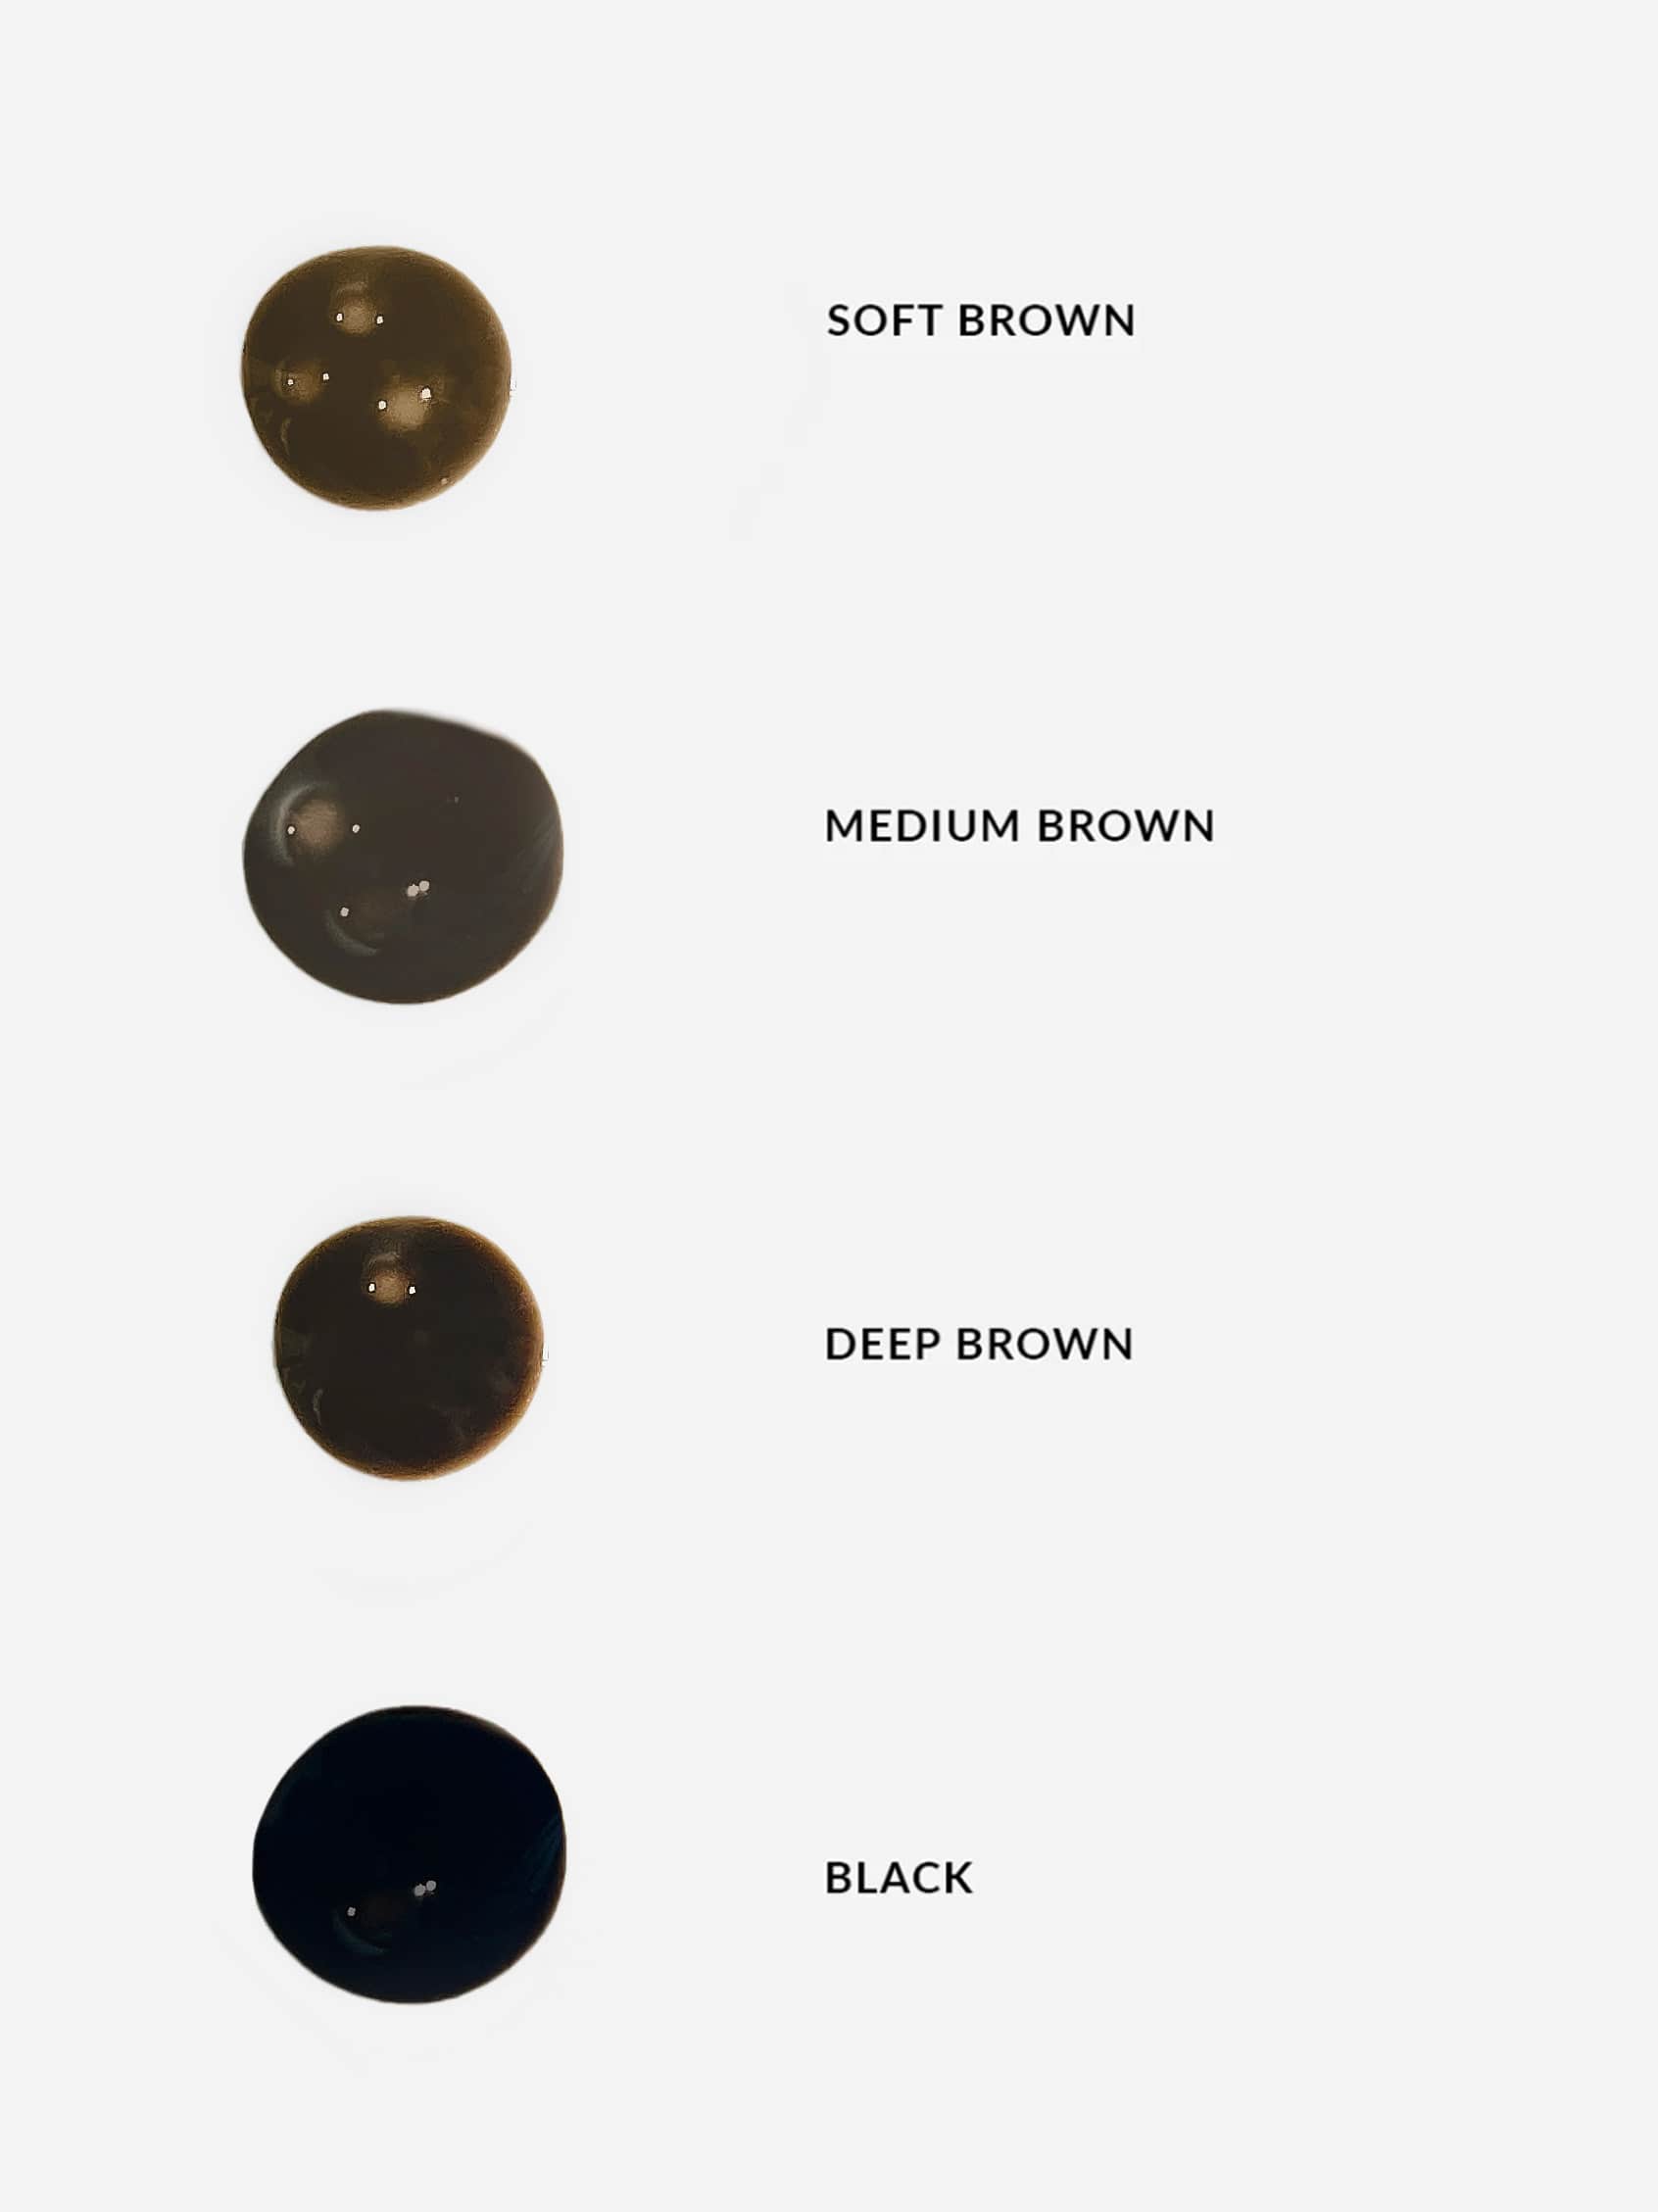 REFY BROW TINT SHADE SWATCHES. 4 SHADES TO CHOOSE FROM